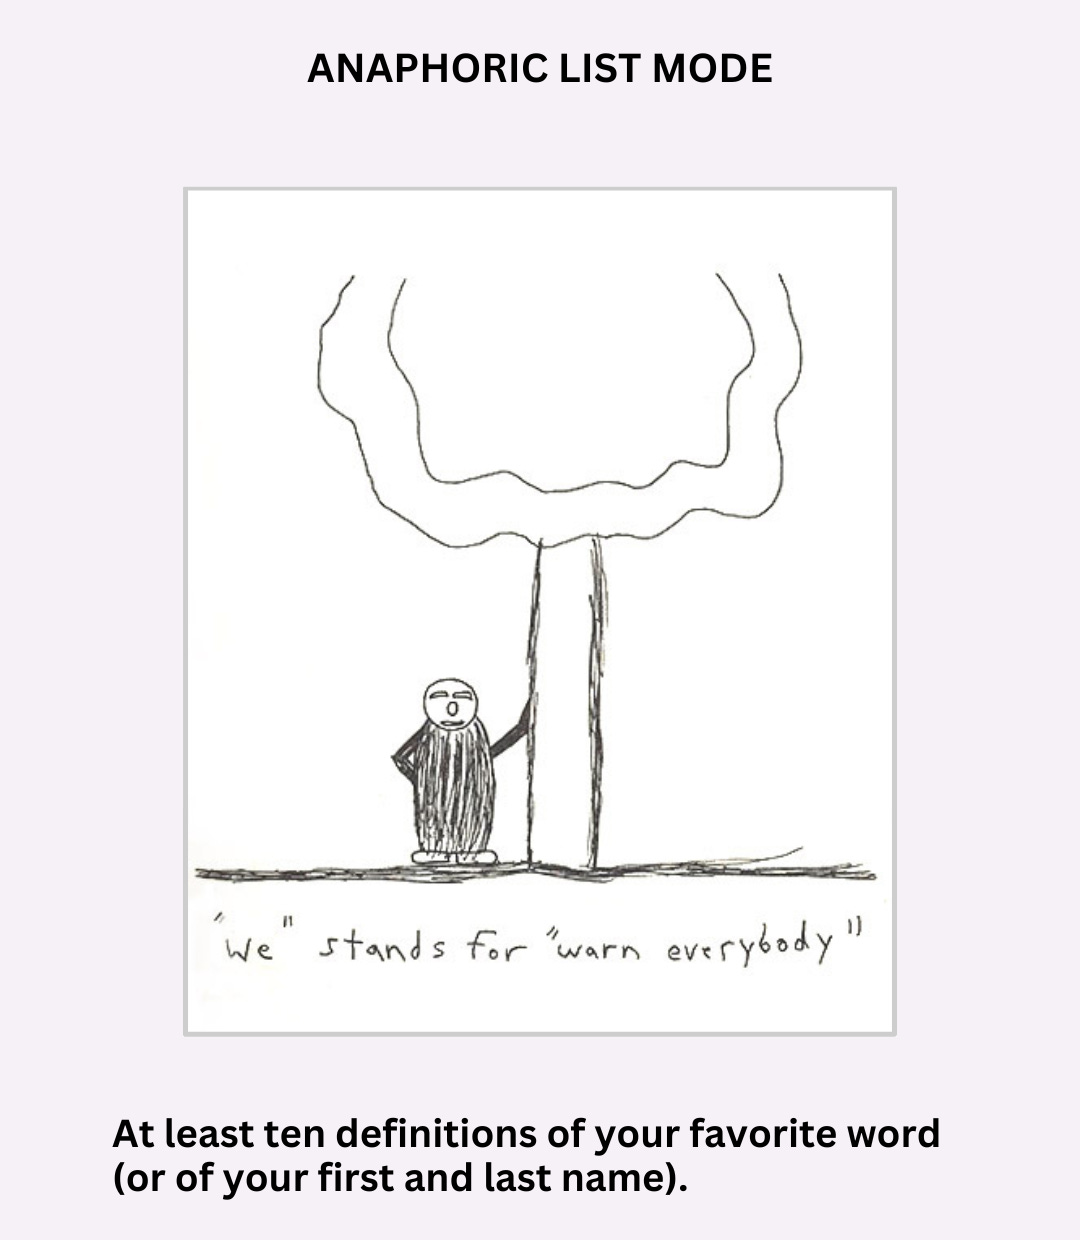 Text reads: "Anaphoric list mode. At least ten definitions of your favorite word (or of your first and last name)." A simple drawing of a person standing next to a tree with their arm on the tree. Under the drawing is a handwritten caption that says, "'We' stands for 'warn everybody'"